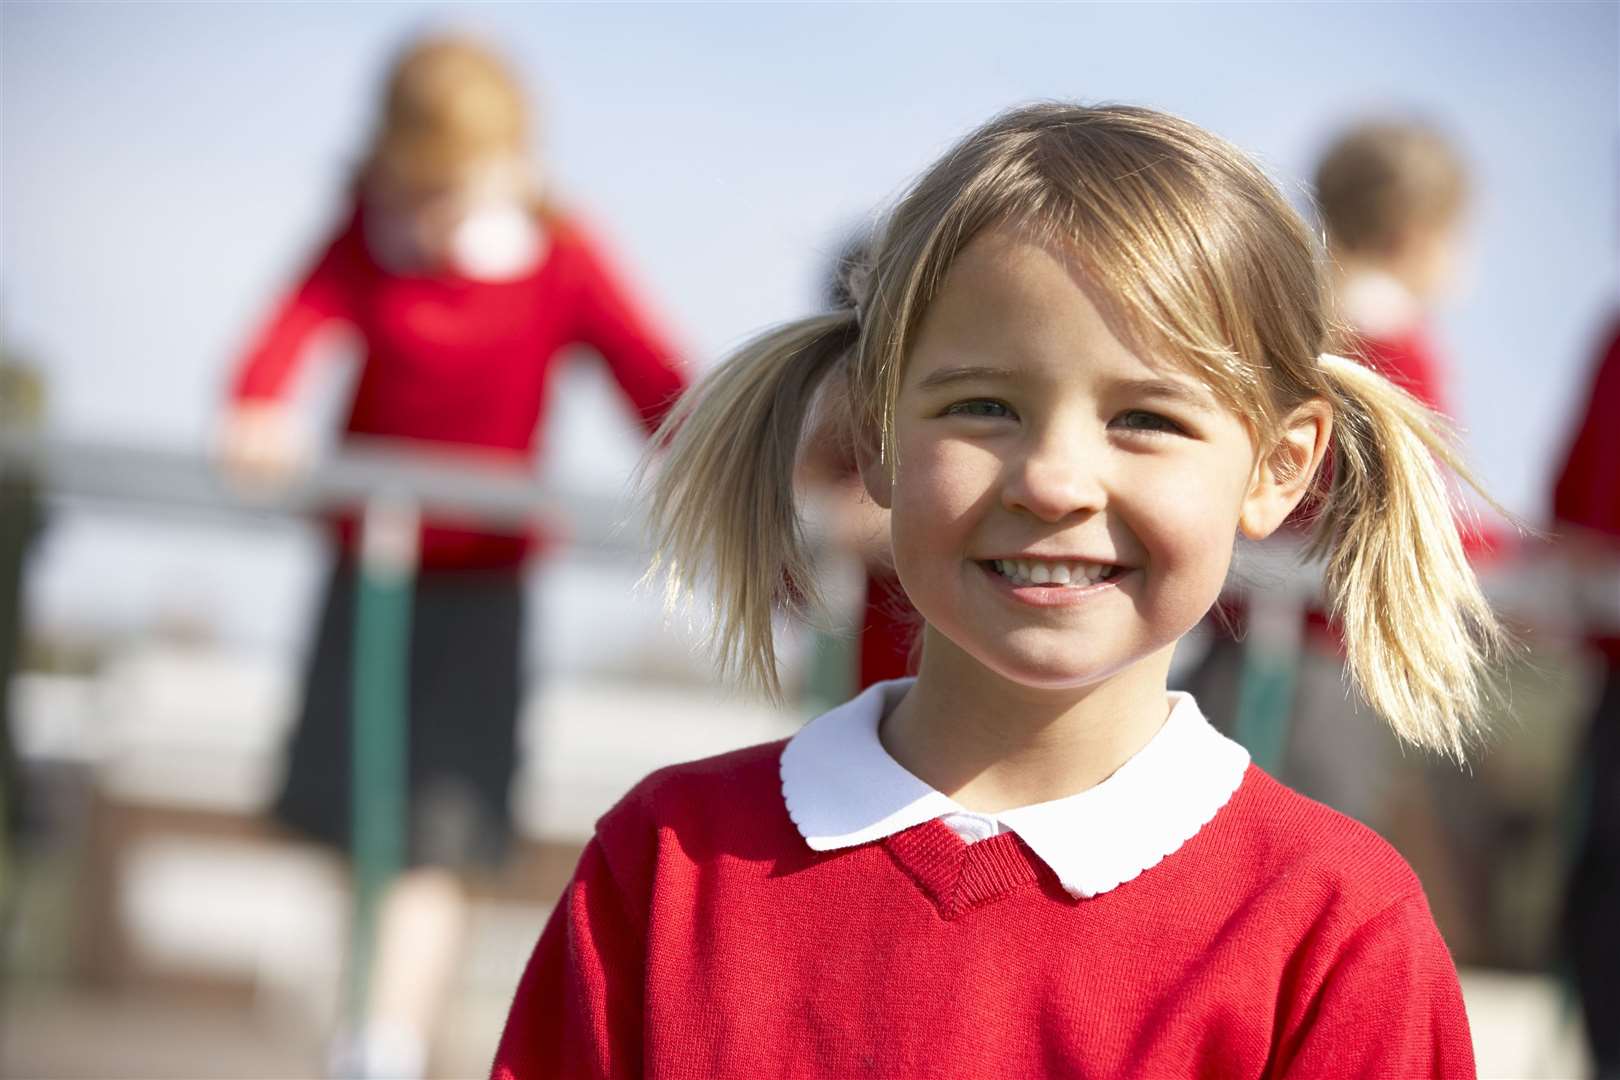 As parents rush to purchase new uniform some styles and sizes are beginning to sell out online